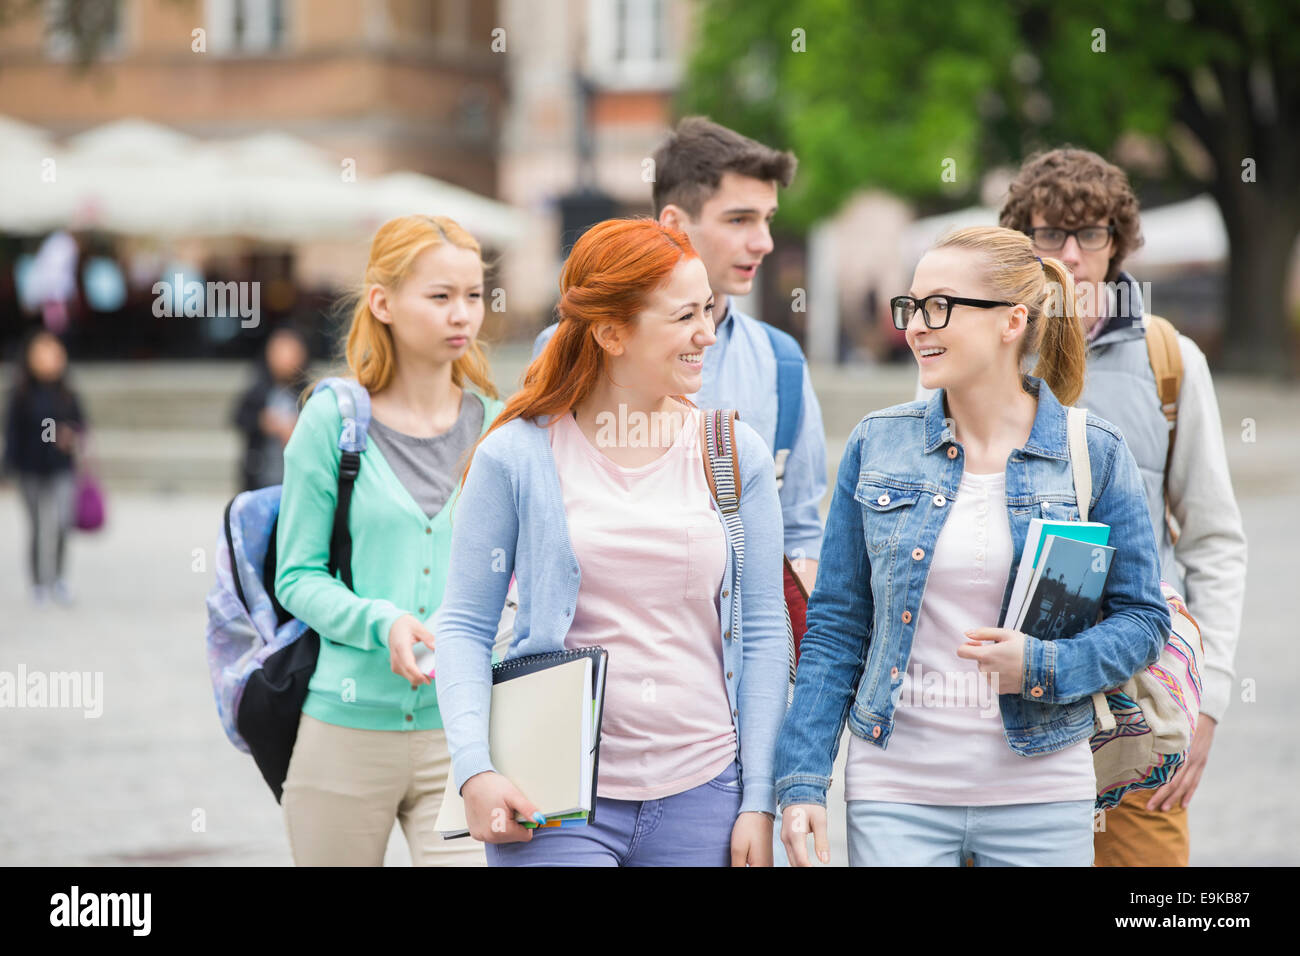 Group of college friends walking outdoors Stock Photo